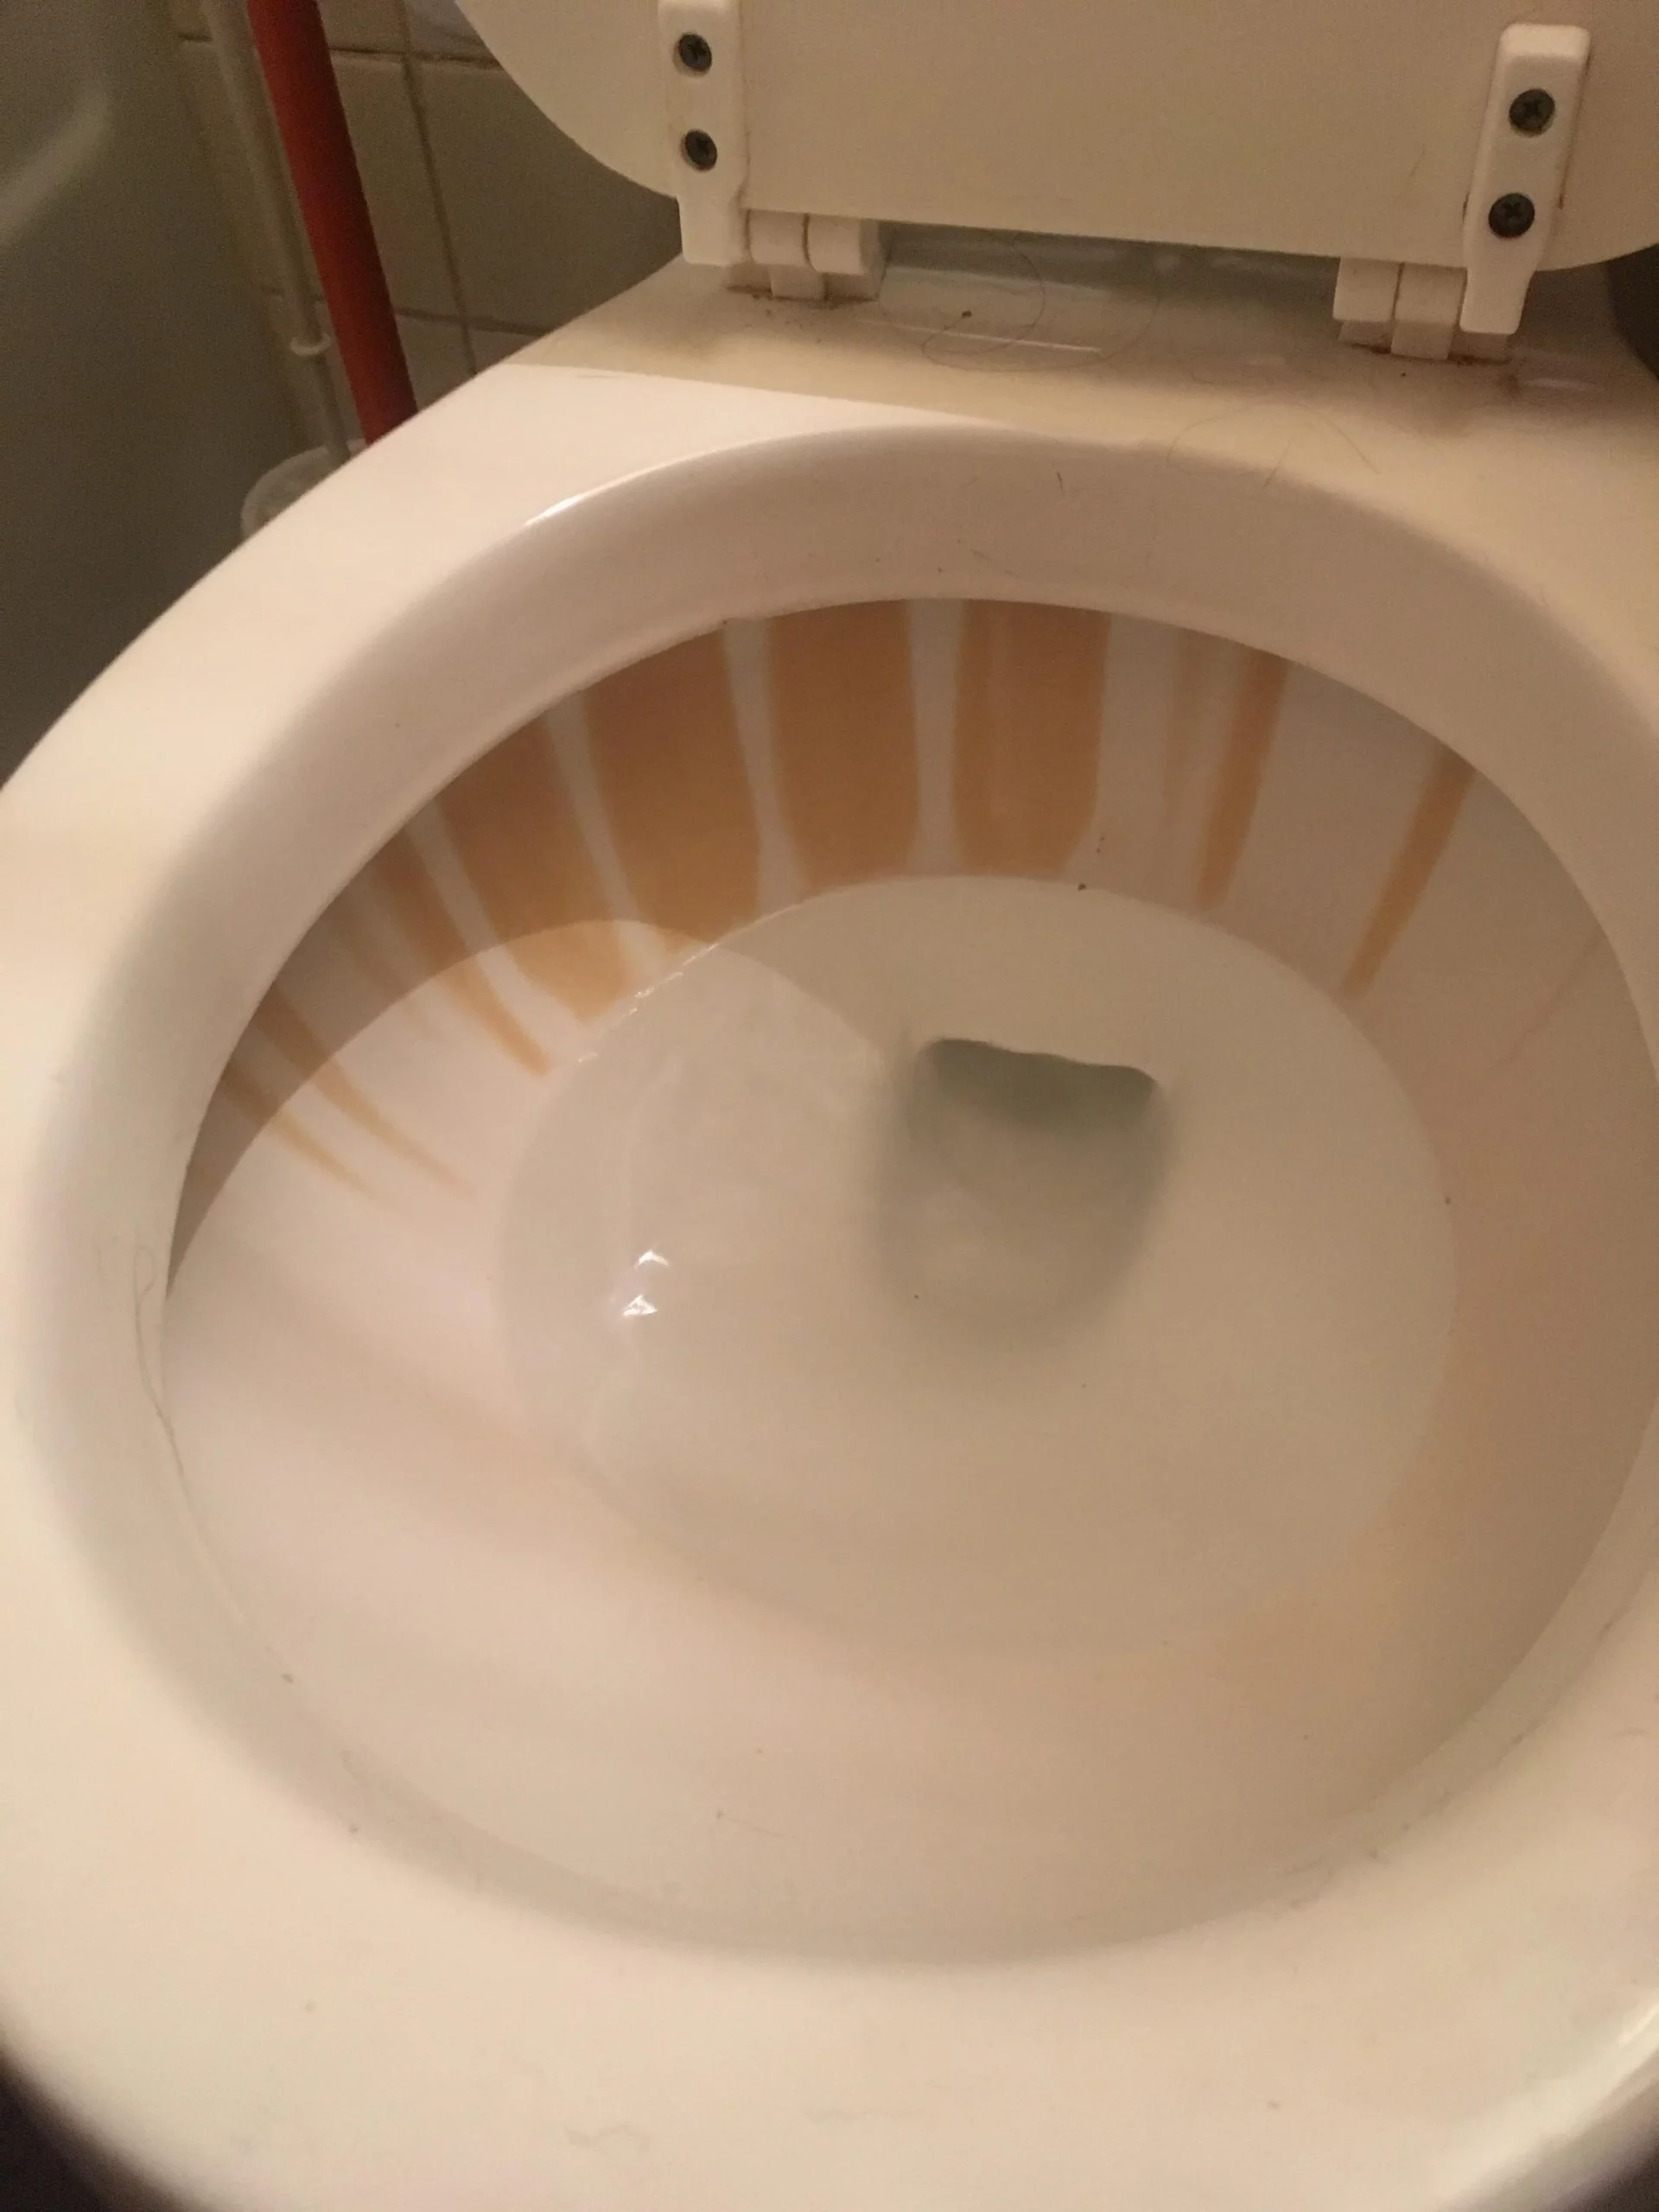 How to Get the Brown Stain Out of the Toilet